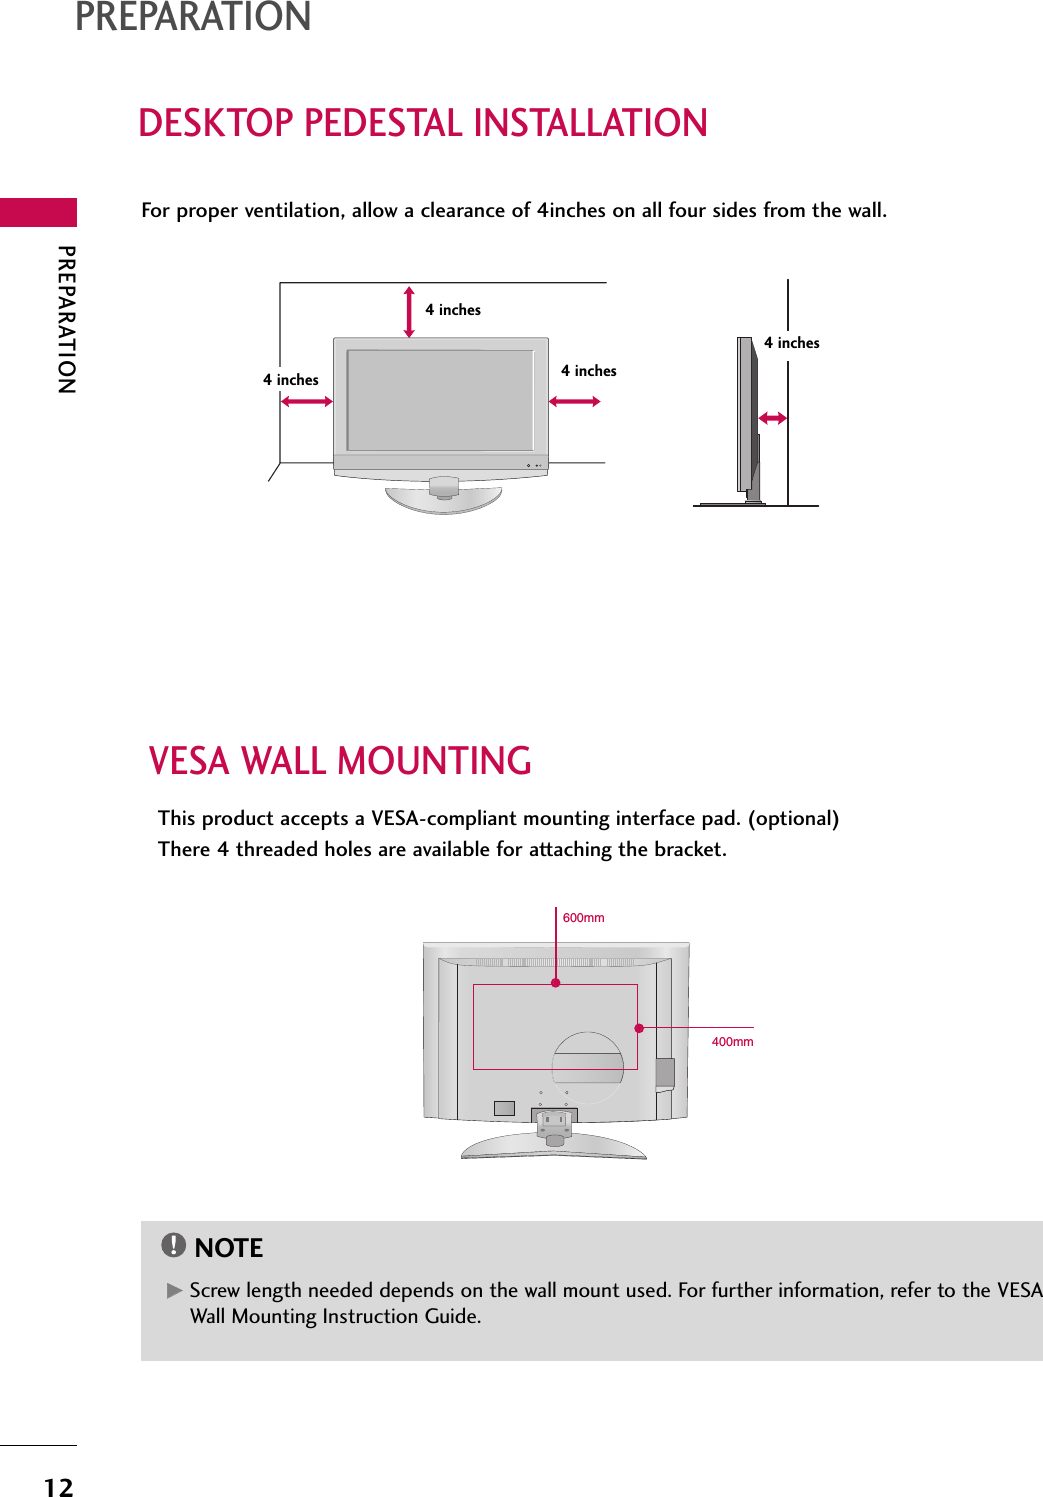 PREPARATIONDESKTOP PEDESTAL INSTALLATIONPREPARATION12For proper ventilation, allow a clearance of 4inches on all four sides from the wall.VESA WALL MOUNTINGThis product accepts a VESA-compliant mounting interface pad. (optional)There 4 threaded holes are available for attaching the bracket.GGScrew length needed depends on the wall mount used. For further information, refer to the VESAWall Mounting Instruction Guide.NOTE4 inches4 inches4 inches4 inches400mm600mm